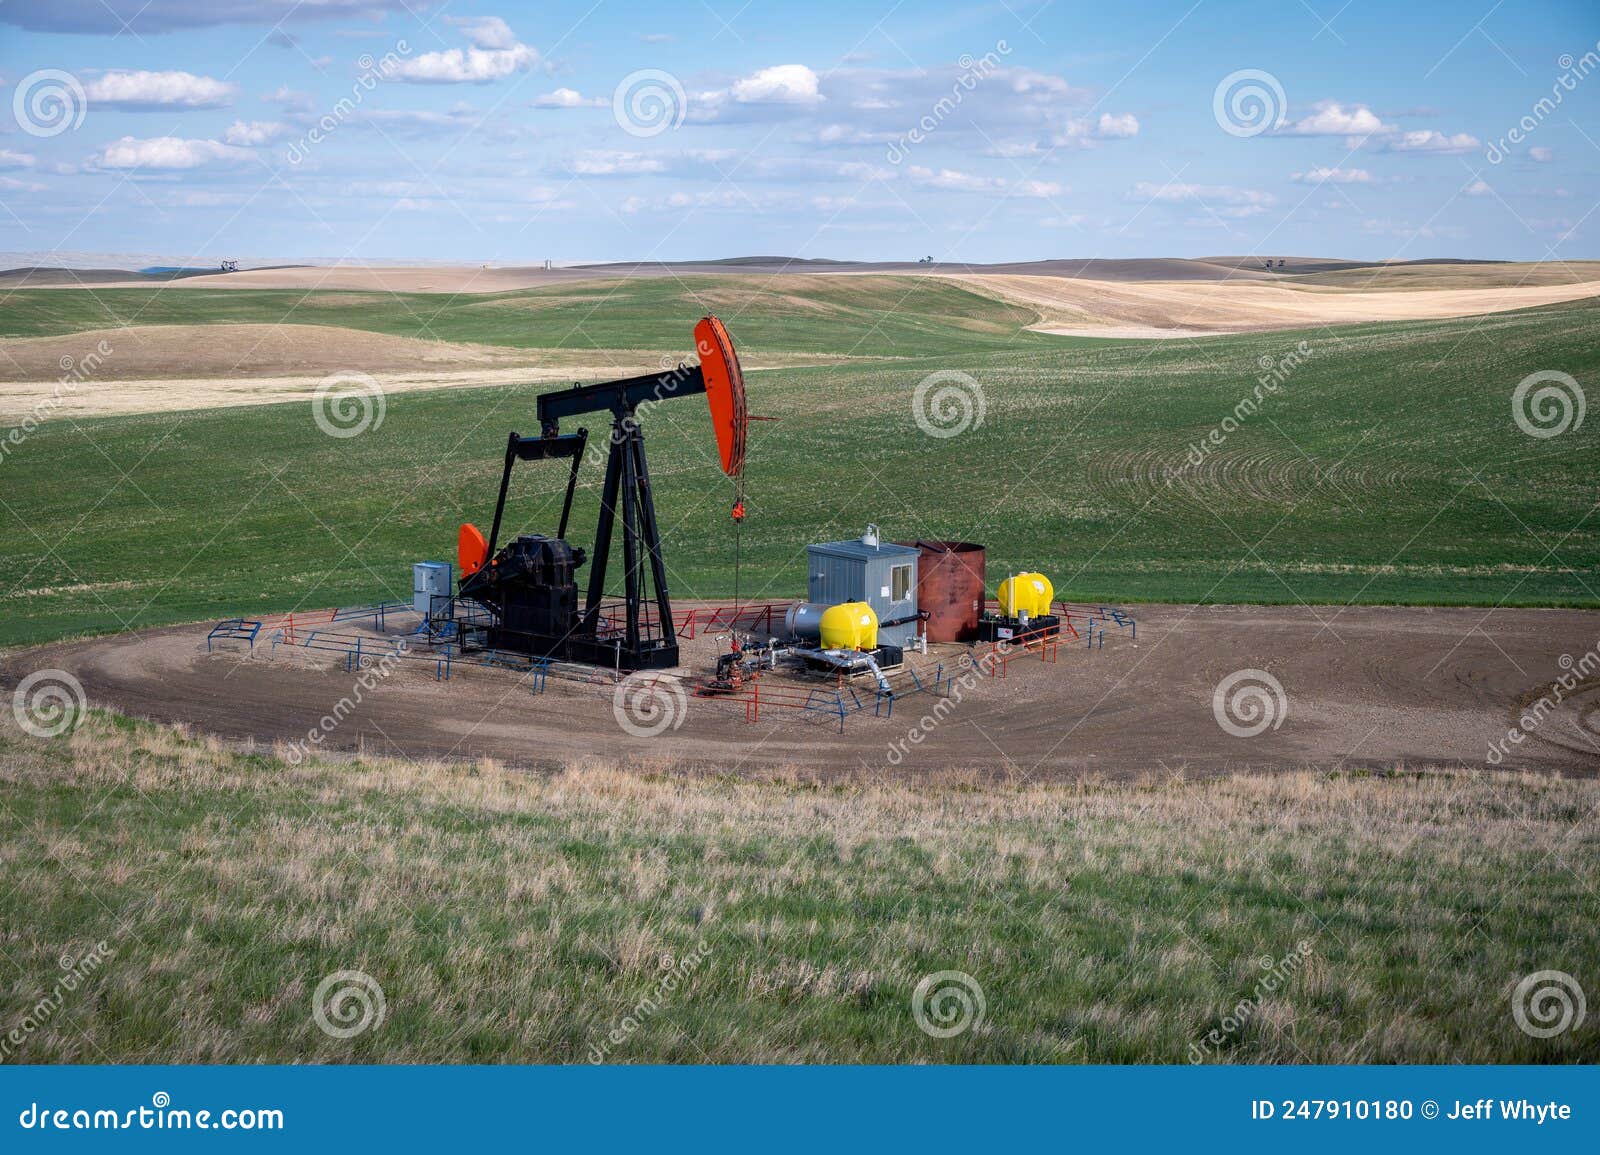 Pumpjacks Working In The Oil Fields Of Alberta Stock Photography ...